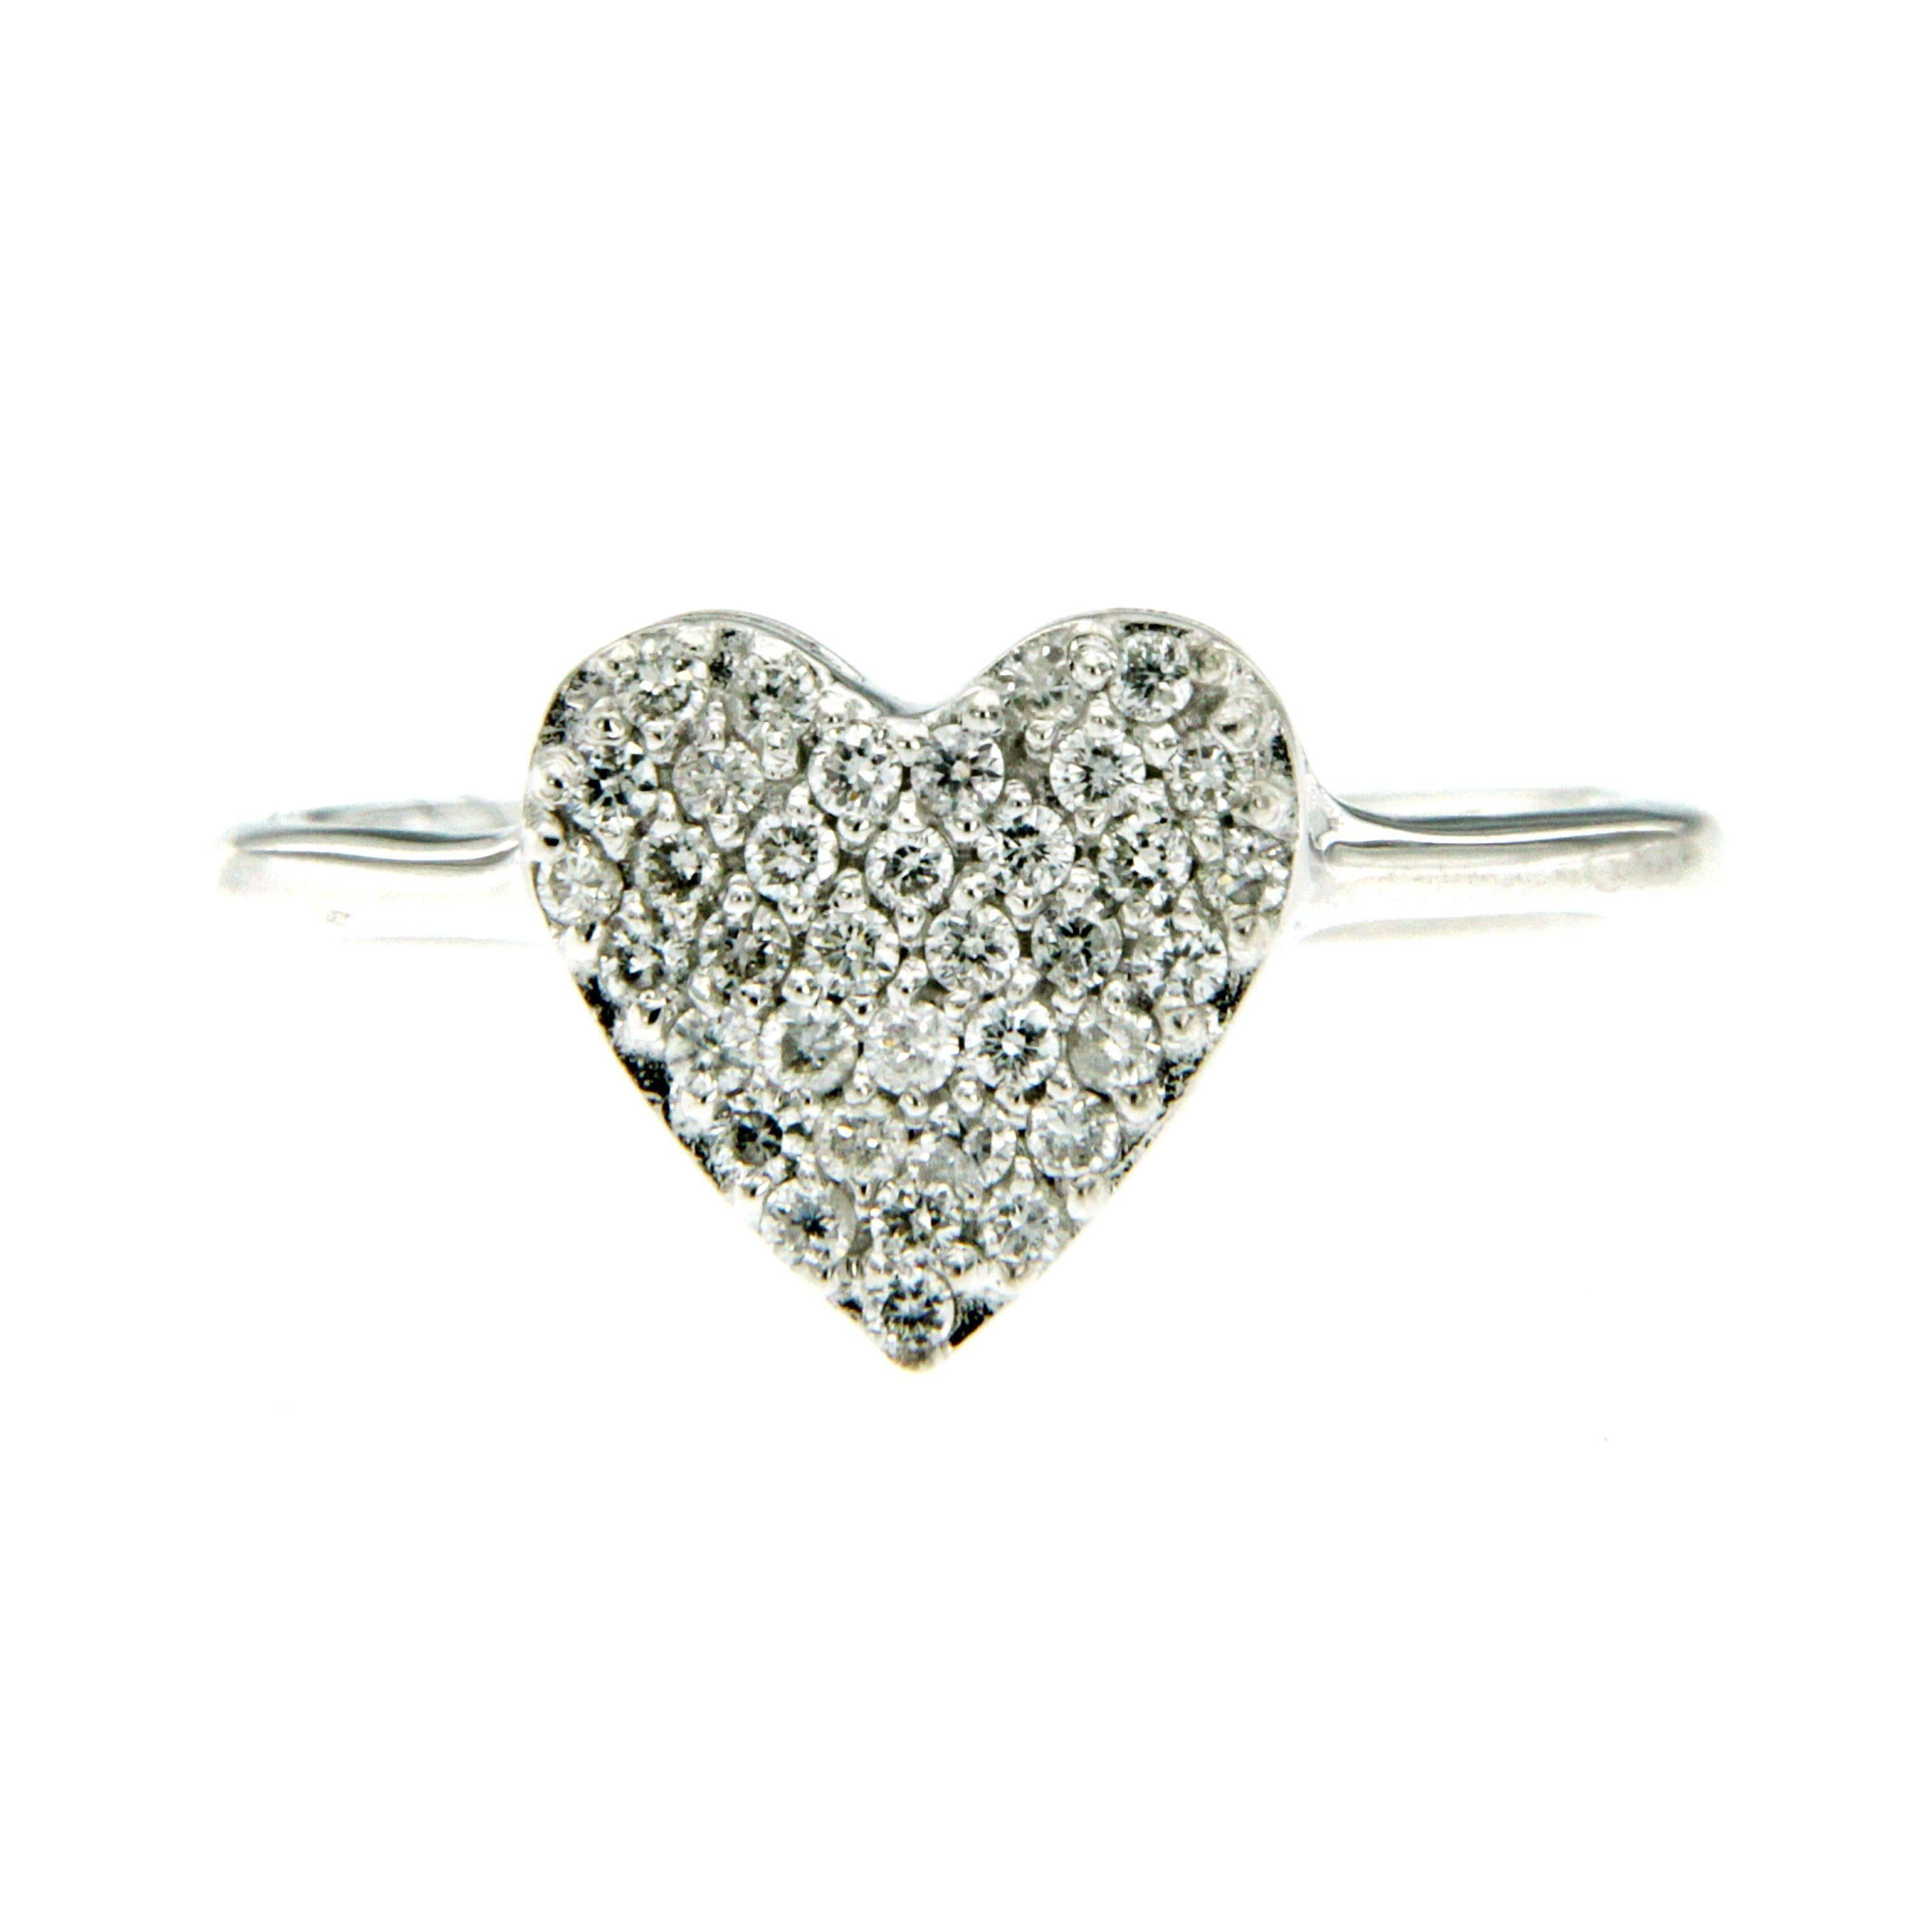 This 18k white gold heart ring is entirely handcrafted and embellished with 0.25-carats of sparkling diamonds.
Wear yours alone or stacked with similar styles.

CONDITION: Brand New
METAL: 18k white Gold - 18k yellow gold or 18k rose gold
GEM STONE: